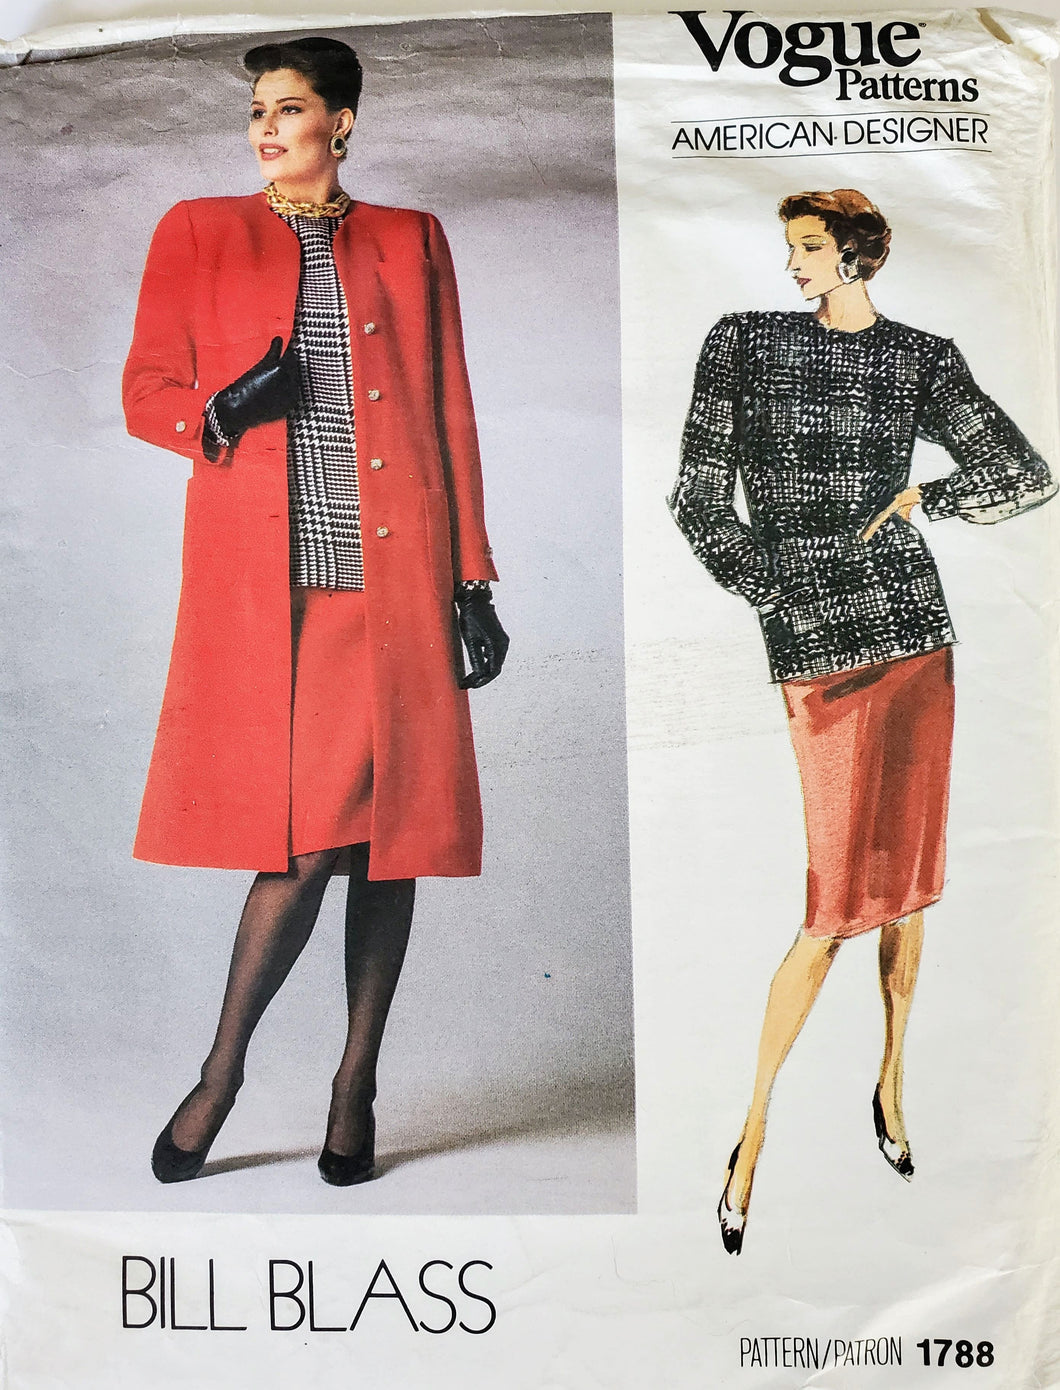 Vogue Pattern 1788, UNCUT, Coat, Jacket and Skirt and Top, American Designer Bill Blass, Misses Sizes 14-16-18